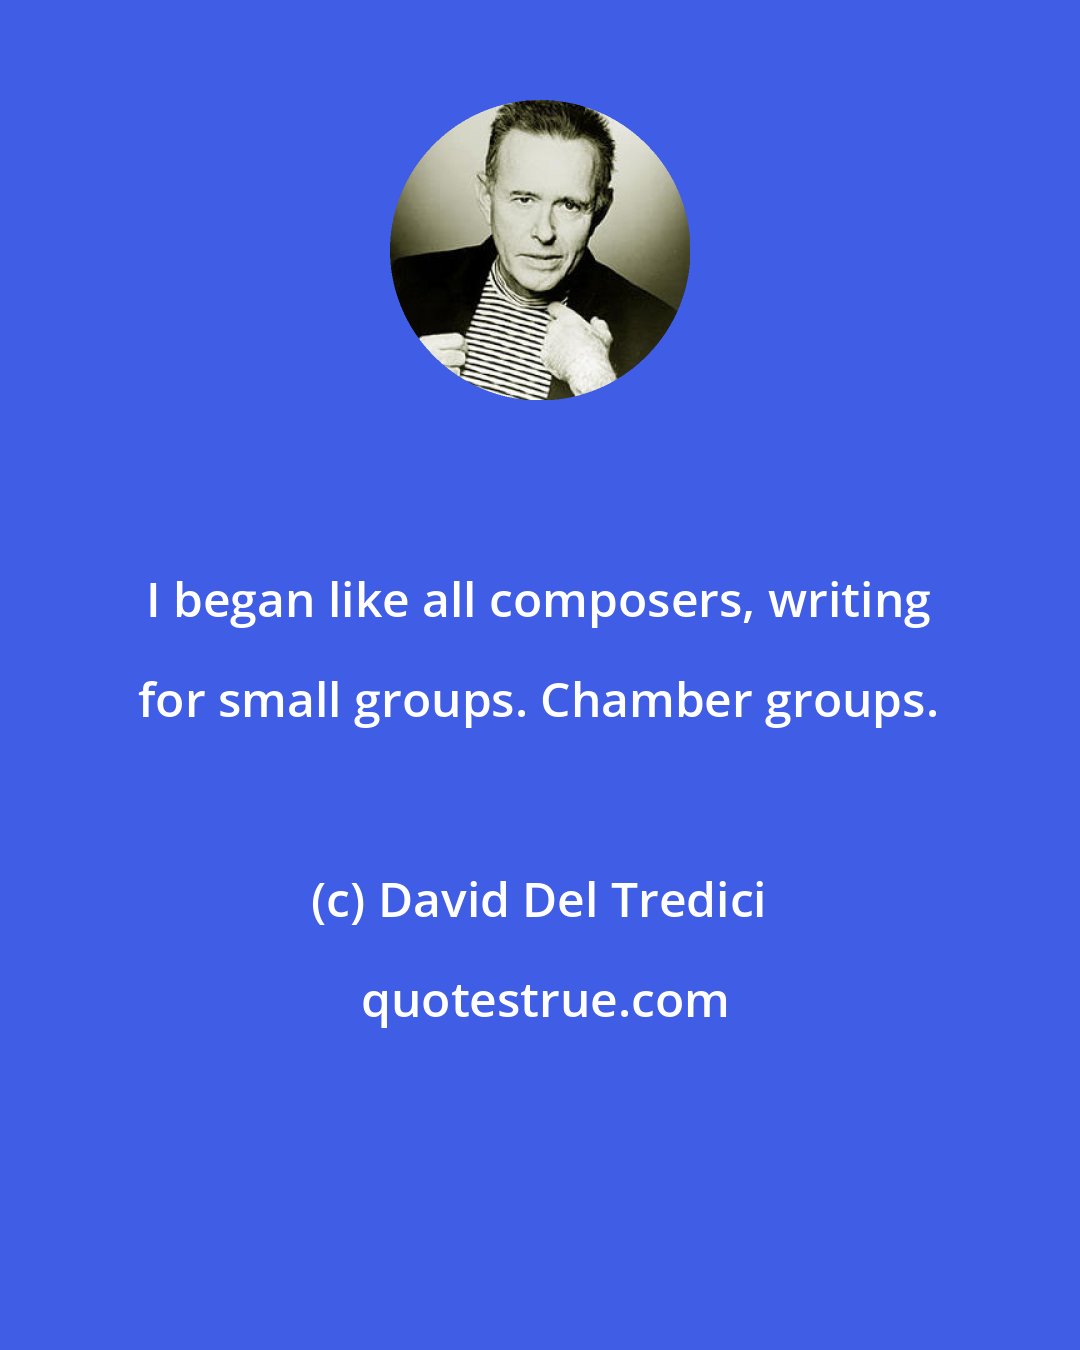 David Del Tredici: I began like all composers, writing for small groups. Chamber groups.